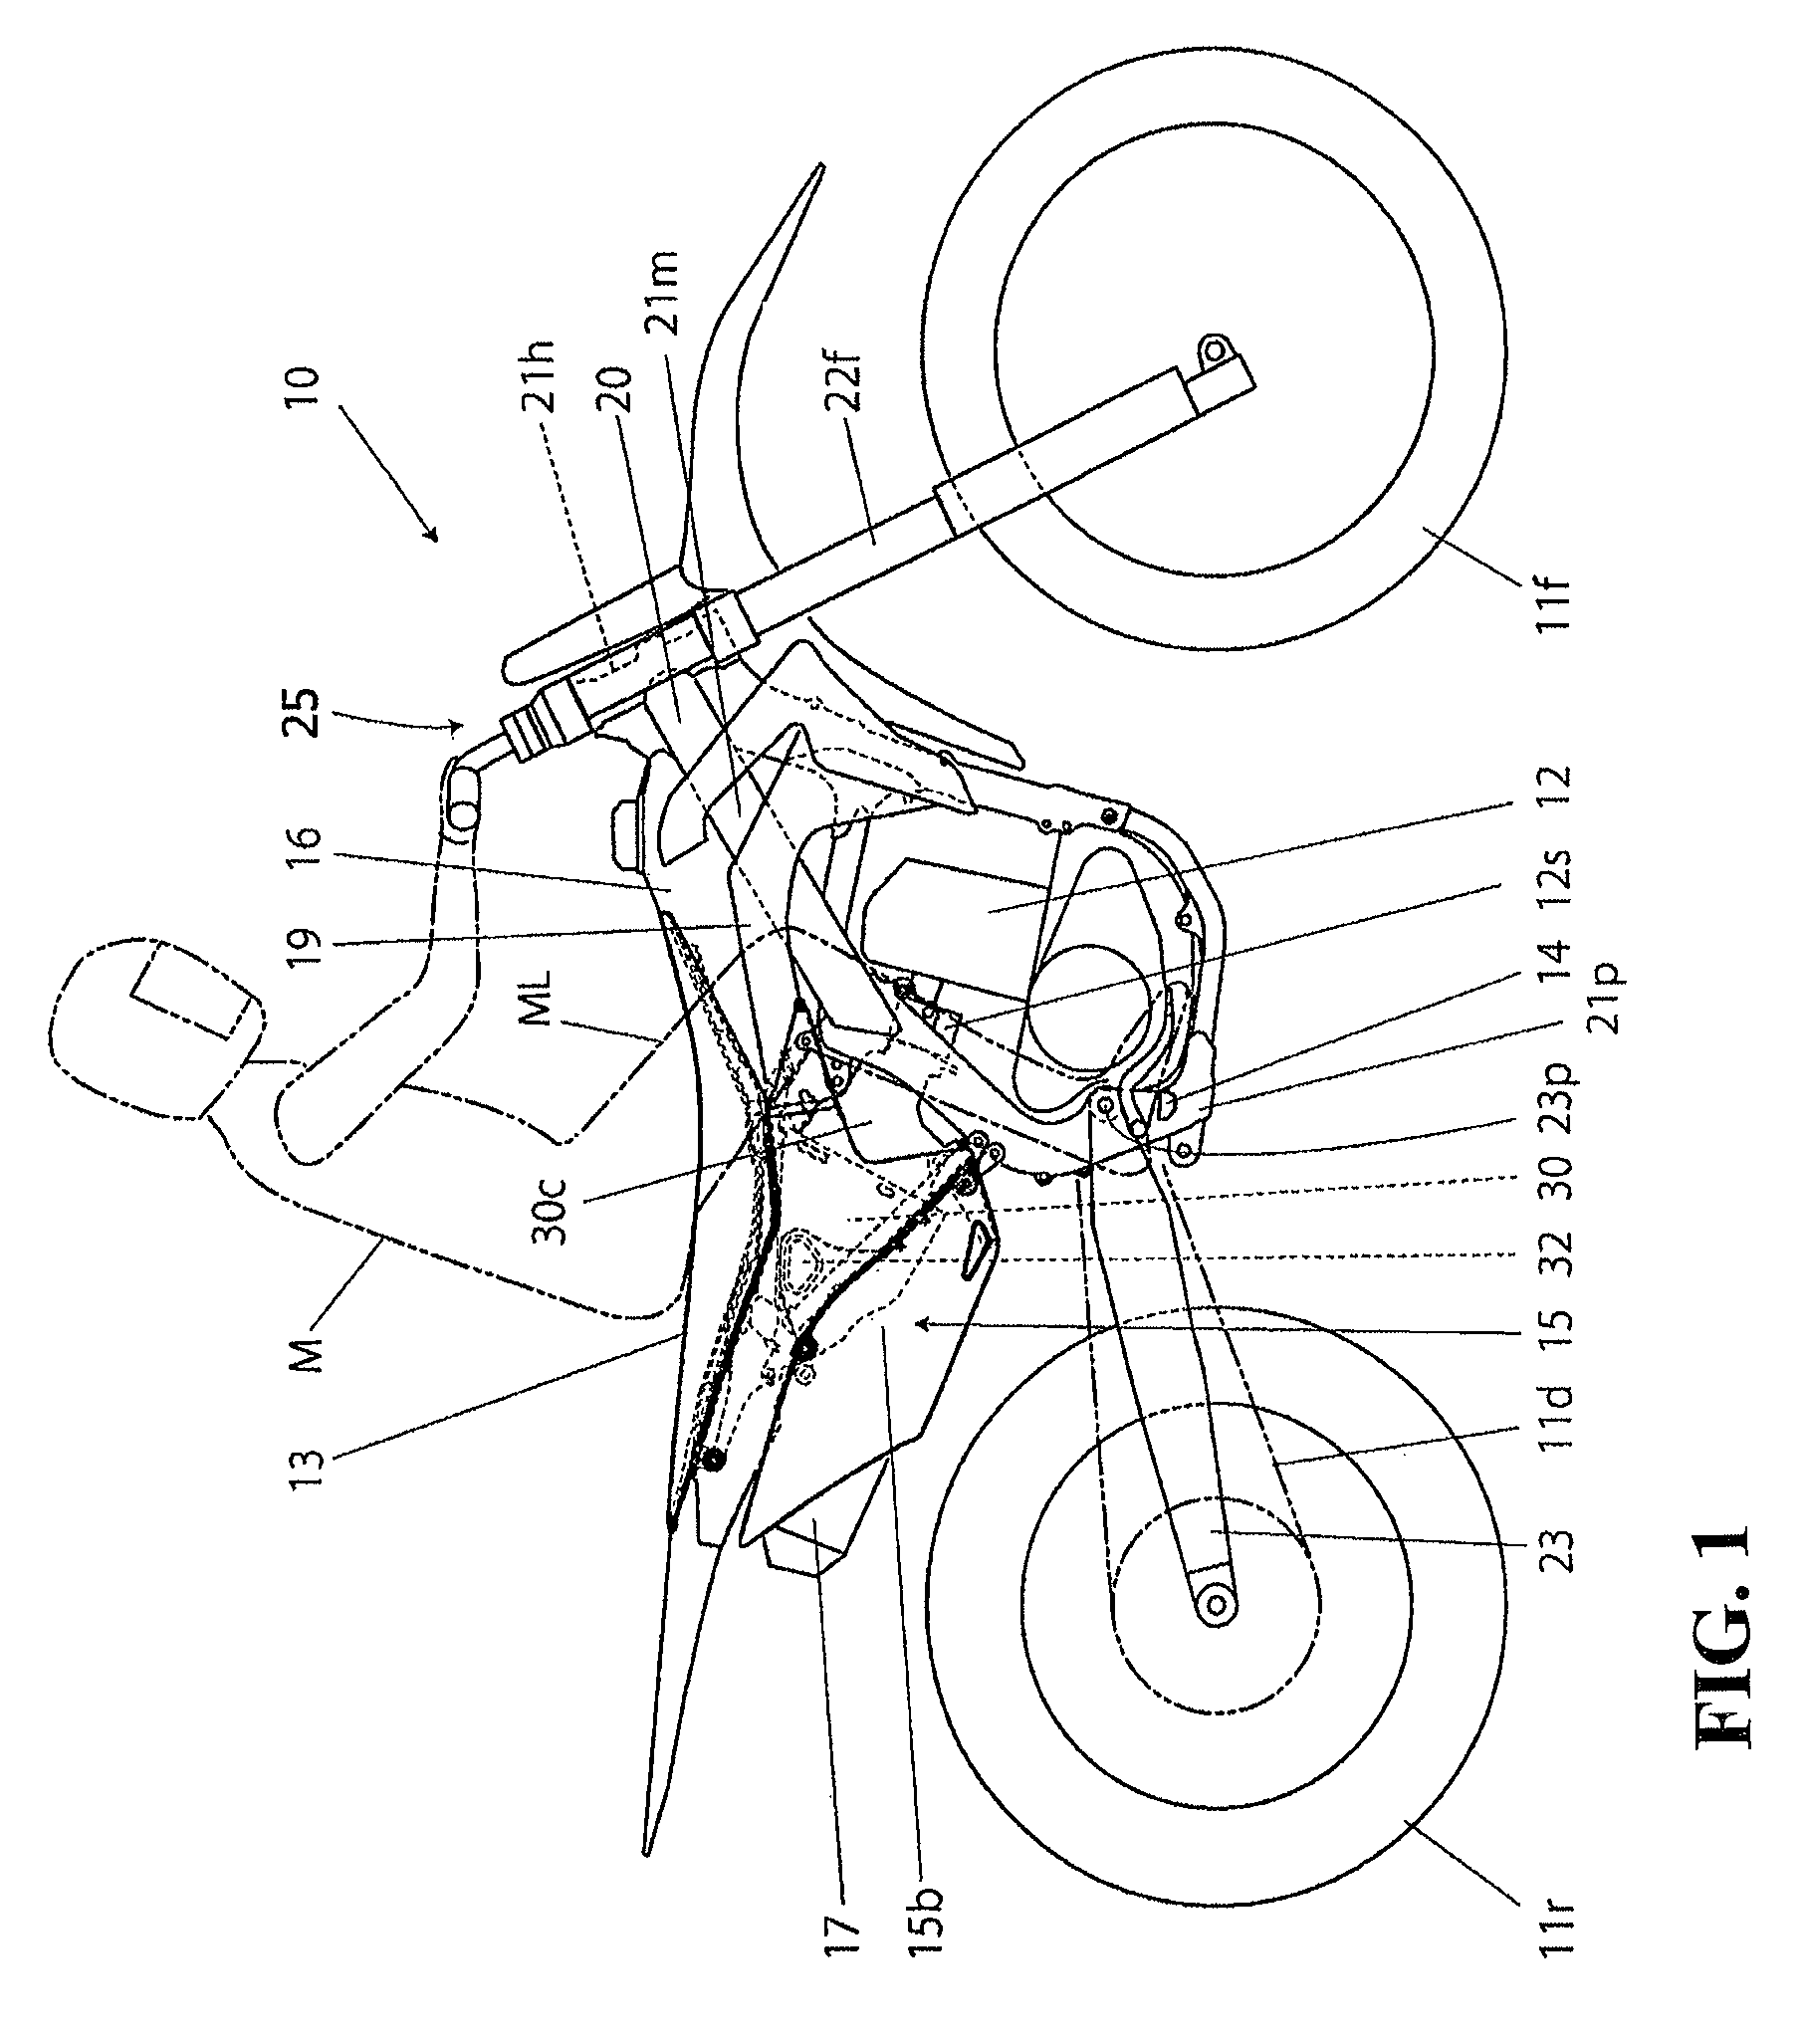 Intake structure for saddle-ride type vehicle